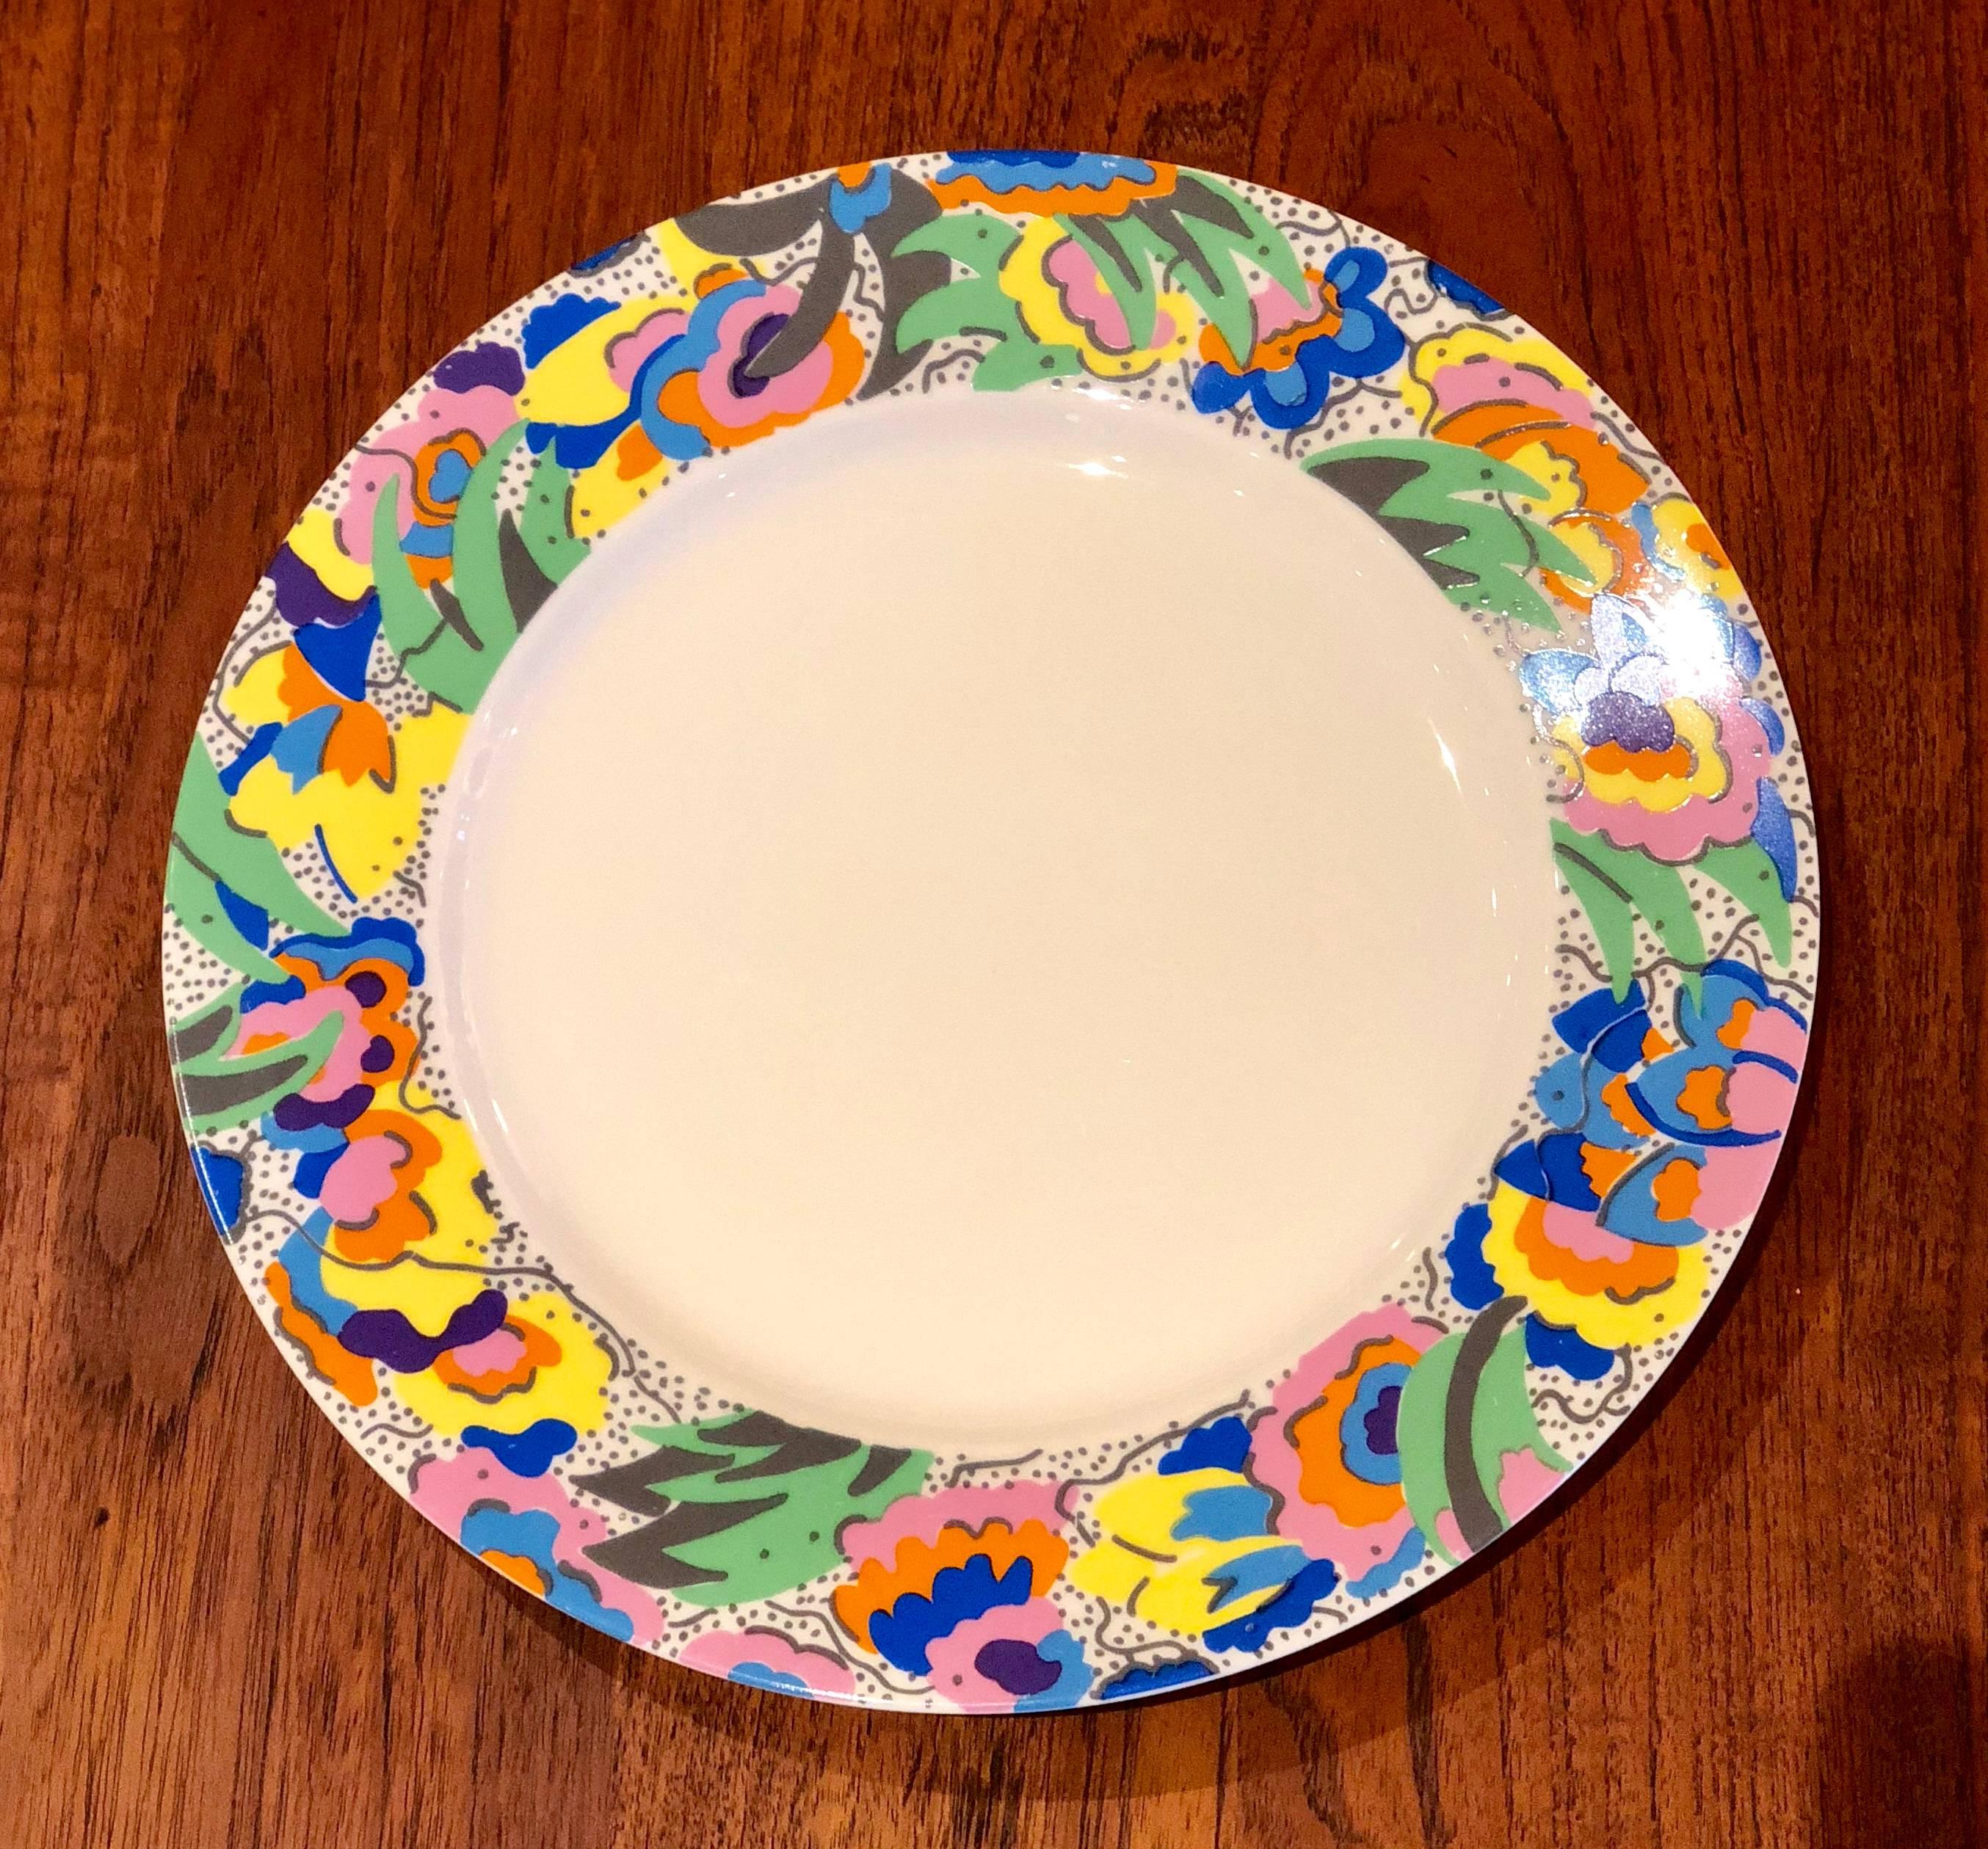 A very rare porcelain charger plate designed by George Sowden for Swid Powell, called Rio, excellent condition no chips or cracks.